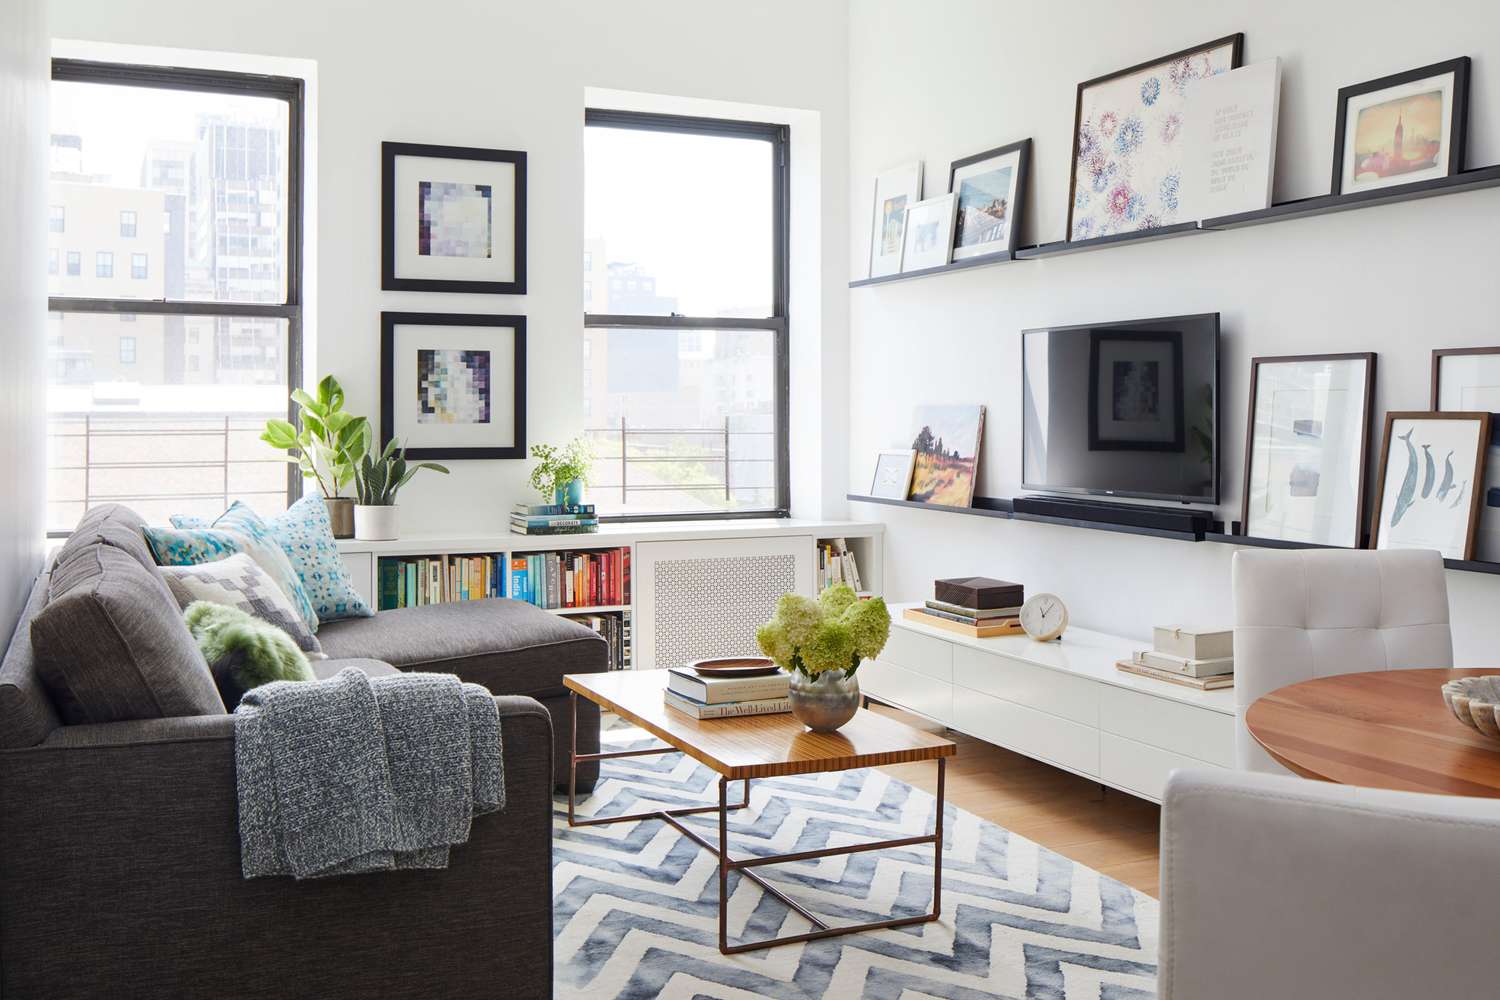 15 Small Apartment Ideas That Make The